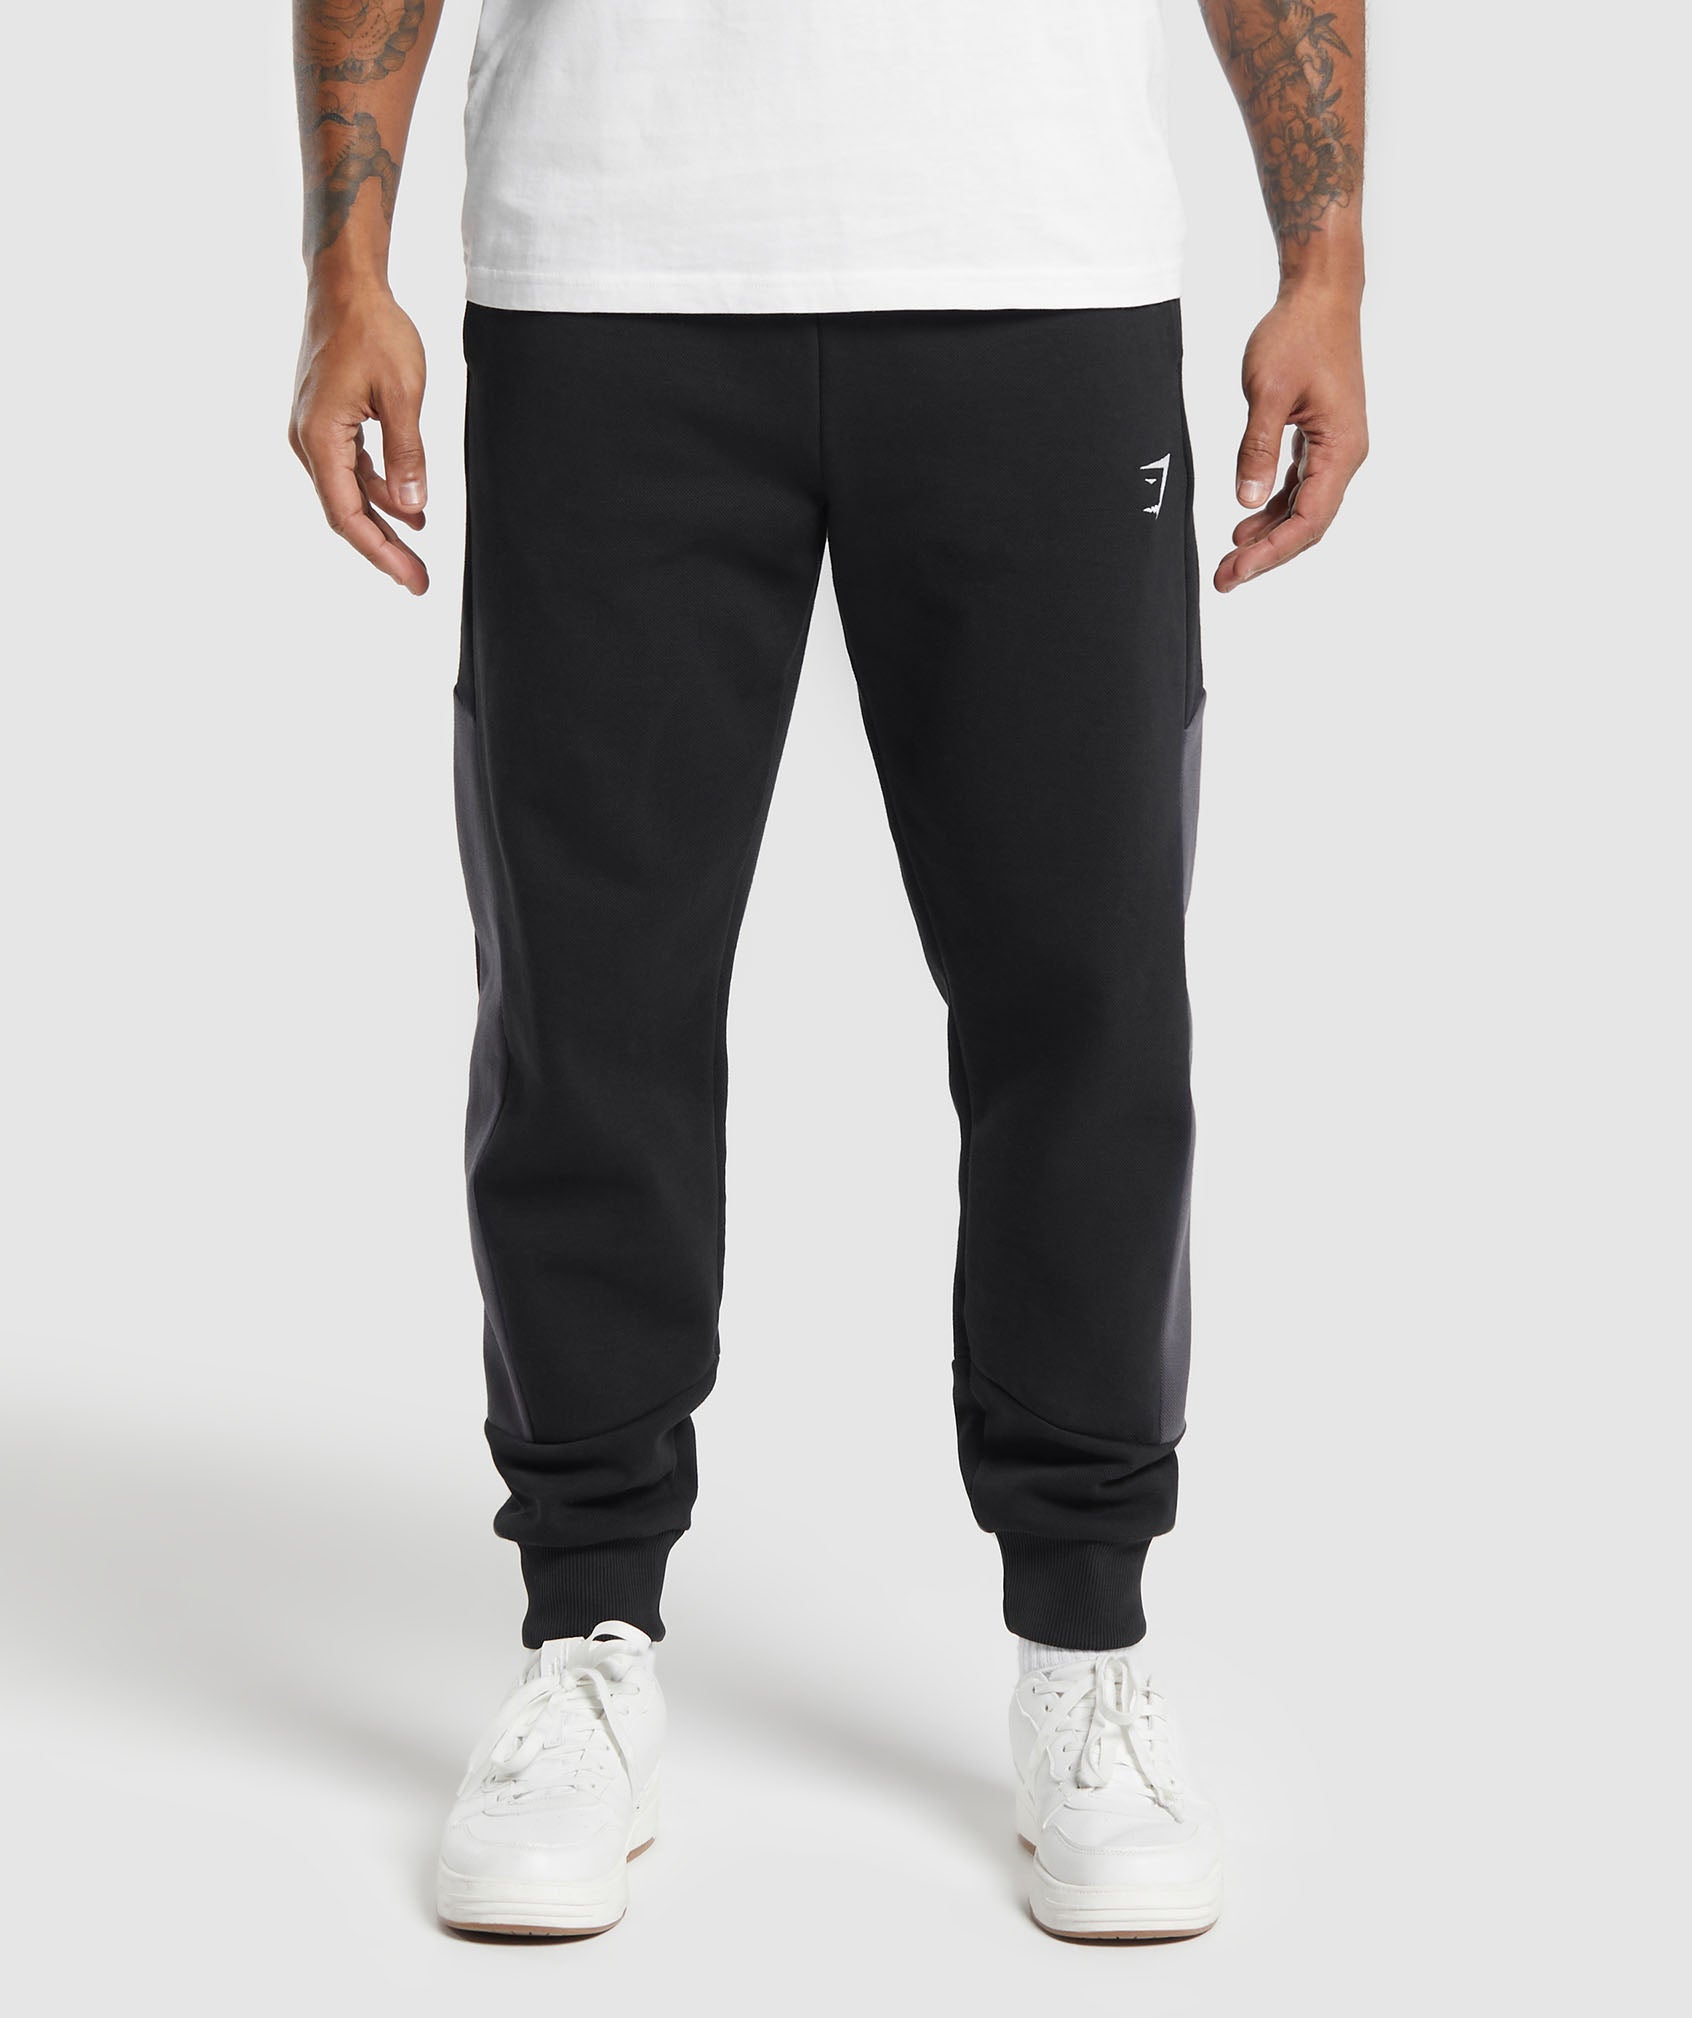 Pique Joggers in Black/Onyx Grey - view 1